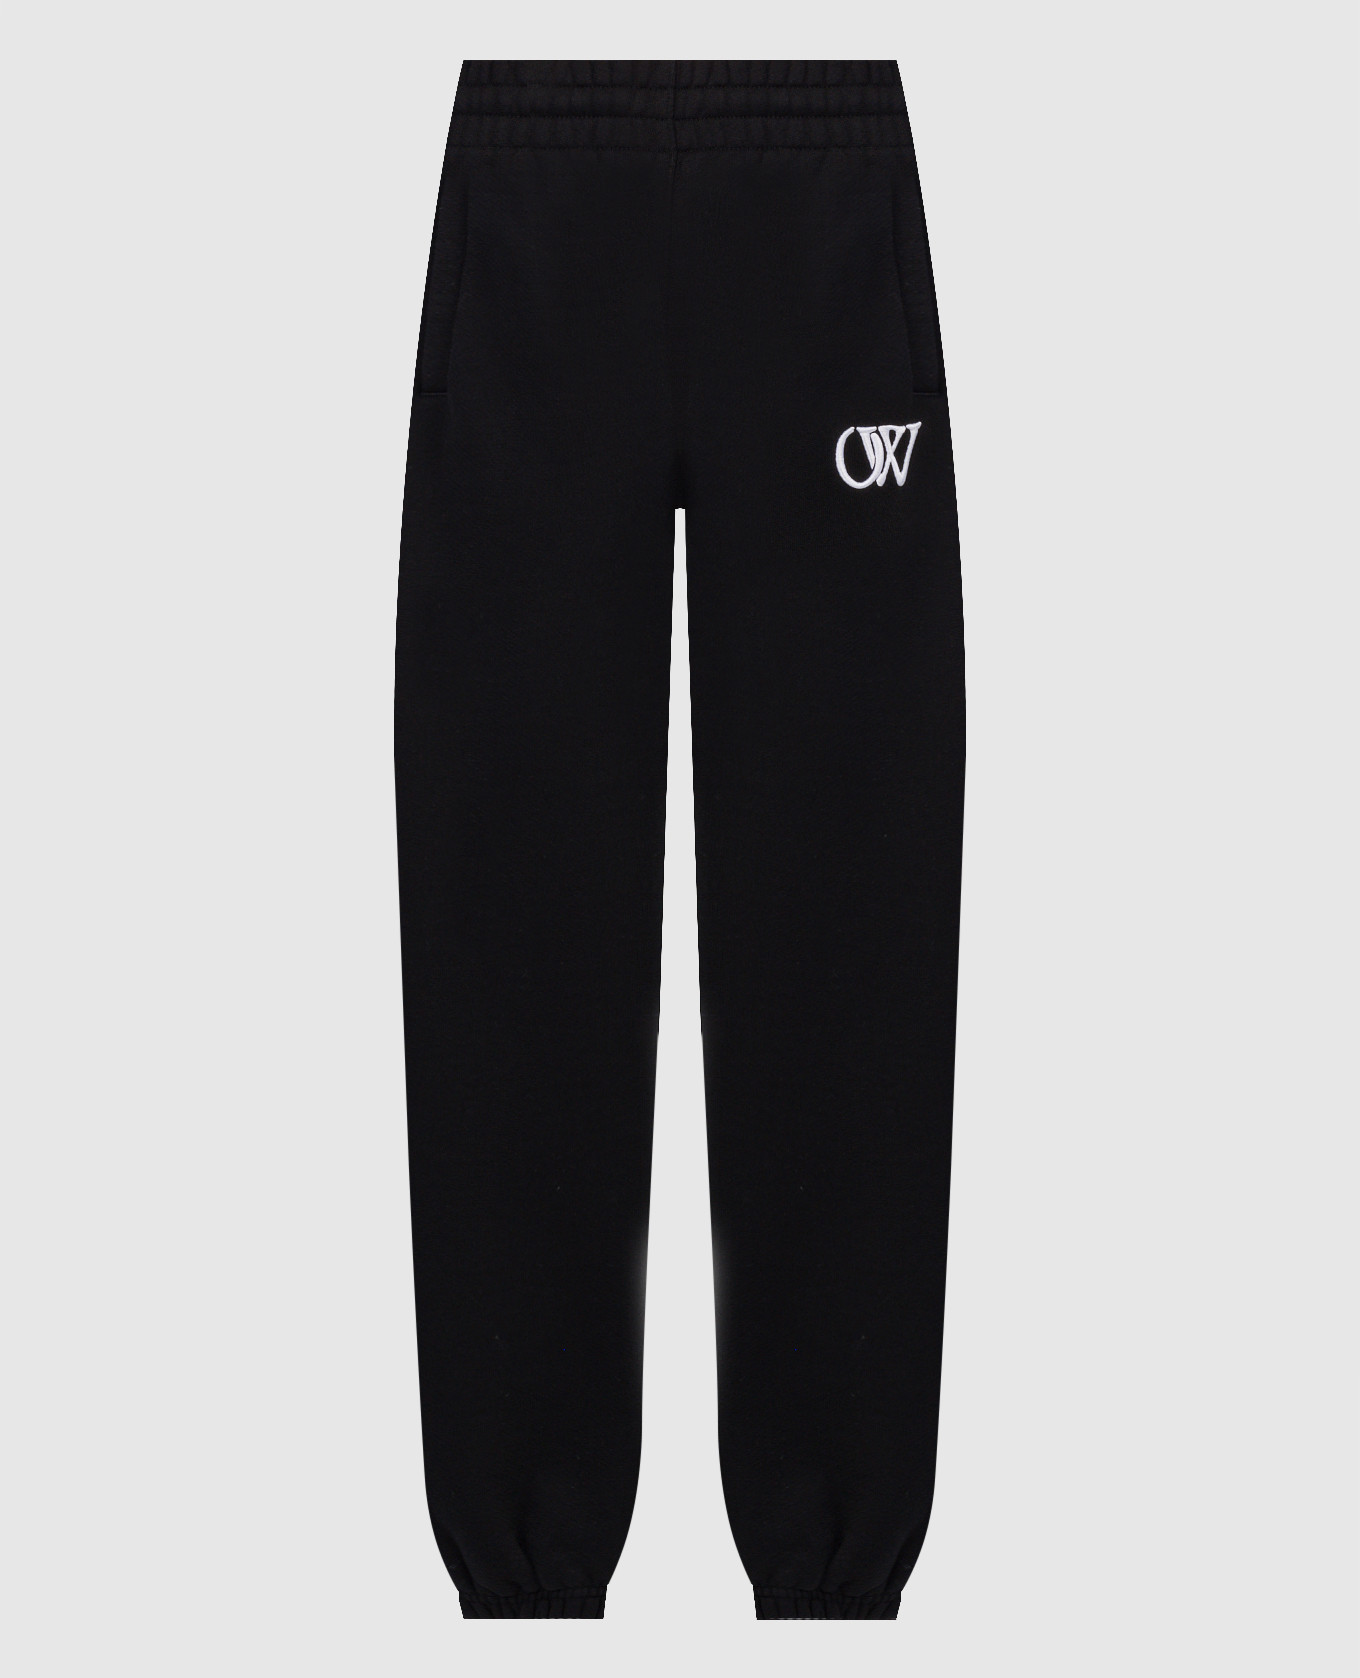 Black joggers with contrast OW logo embroidery